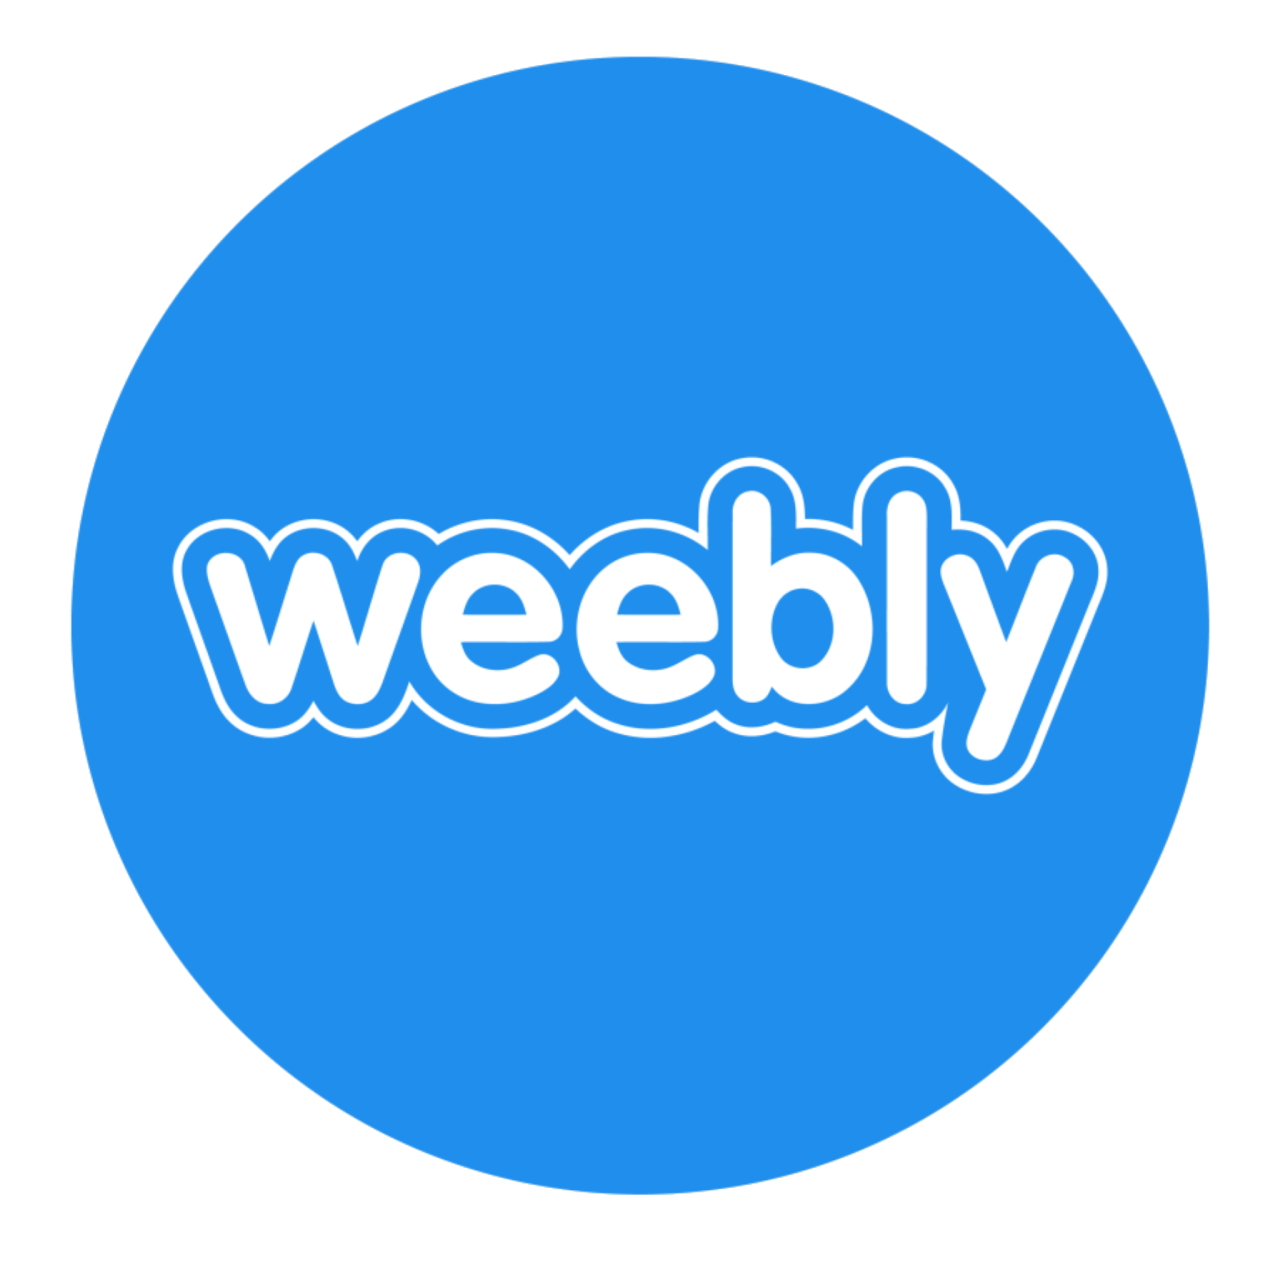 a blue circle with weebly text